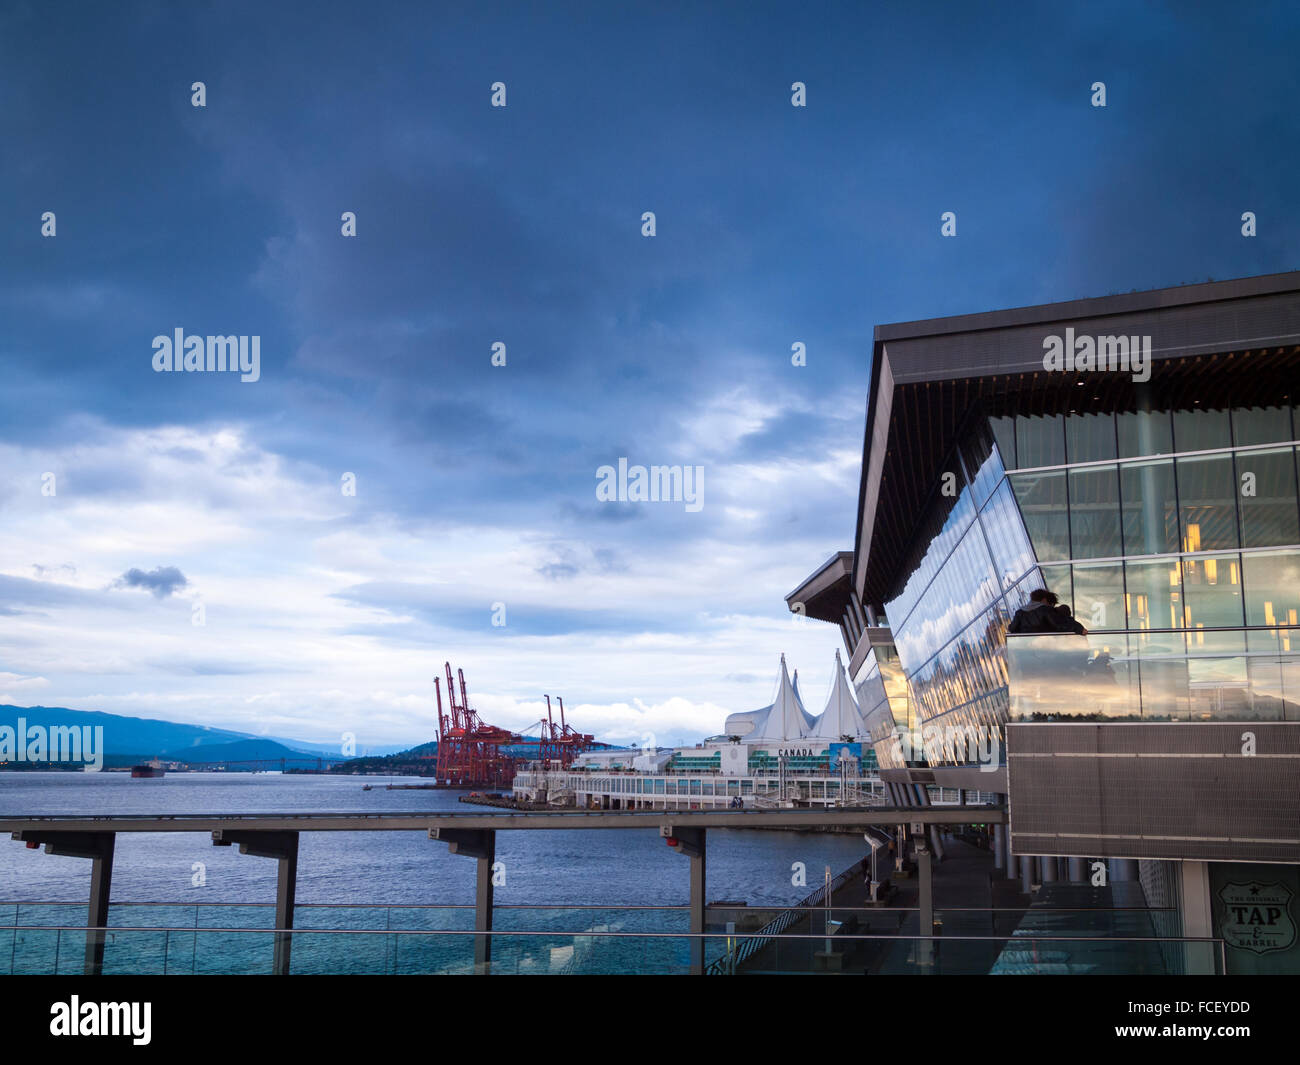 In the foreground, the West Building of the Vancouver Convention Centre. The East Building (Canada Place) is in the background. Stock Photo